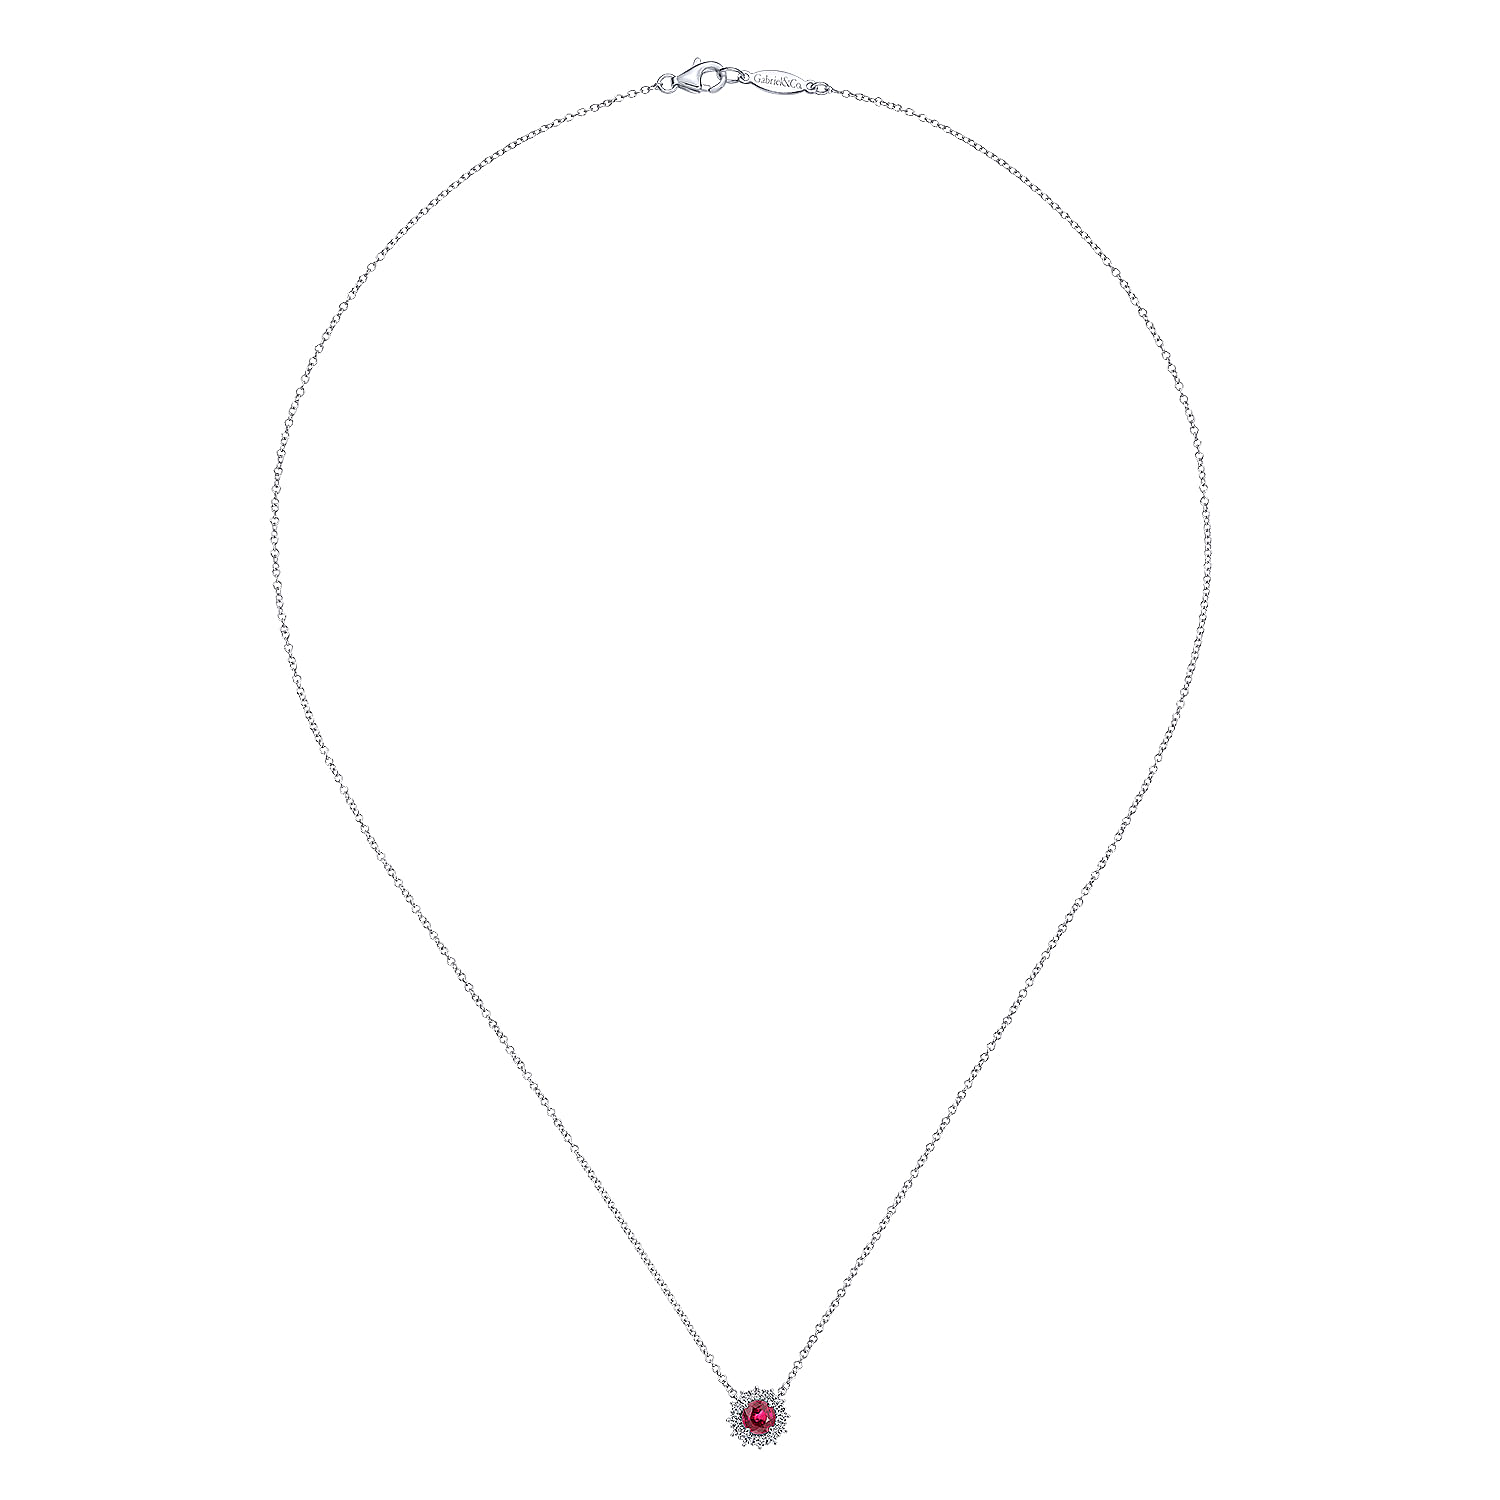 18 inch 14K White Gold Round Ruby and Diamond Halo Pendant Necklace